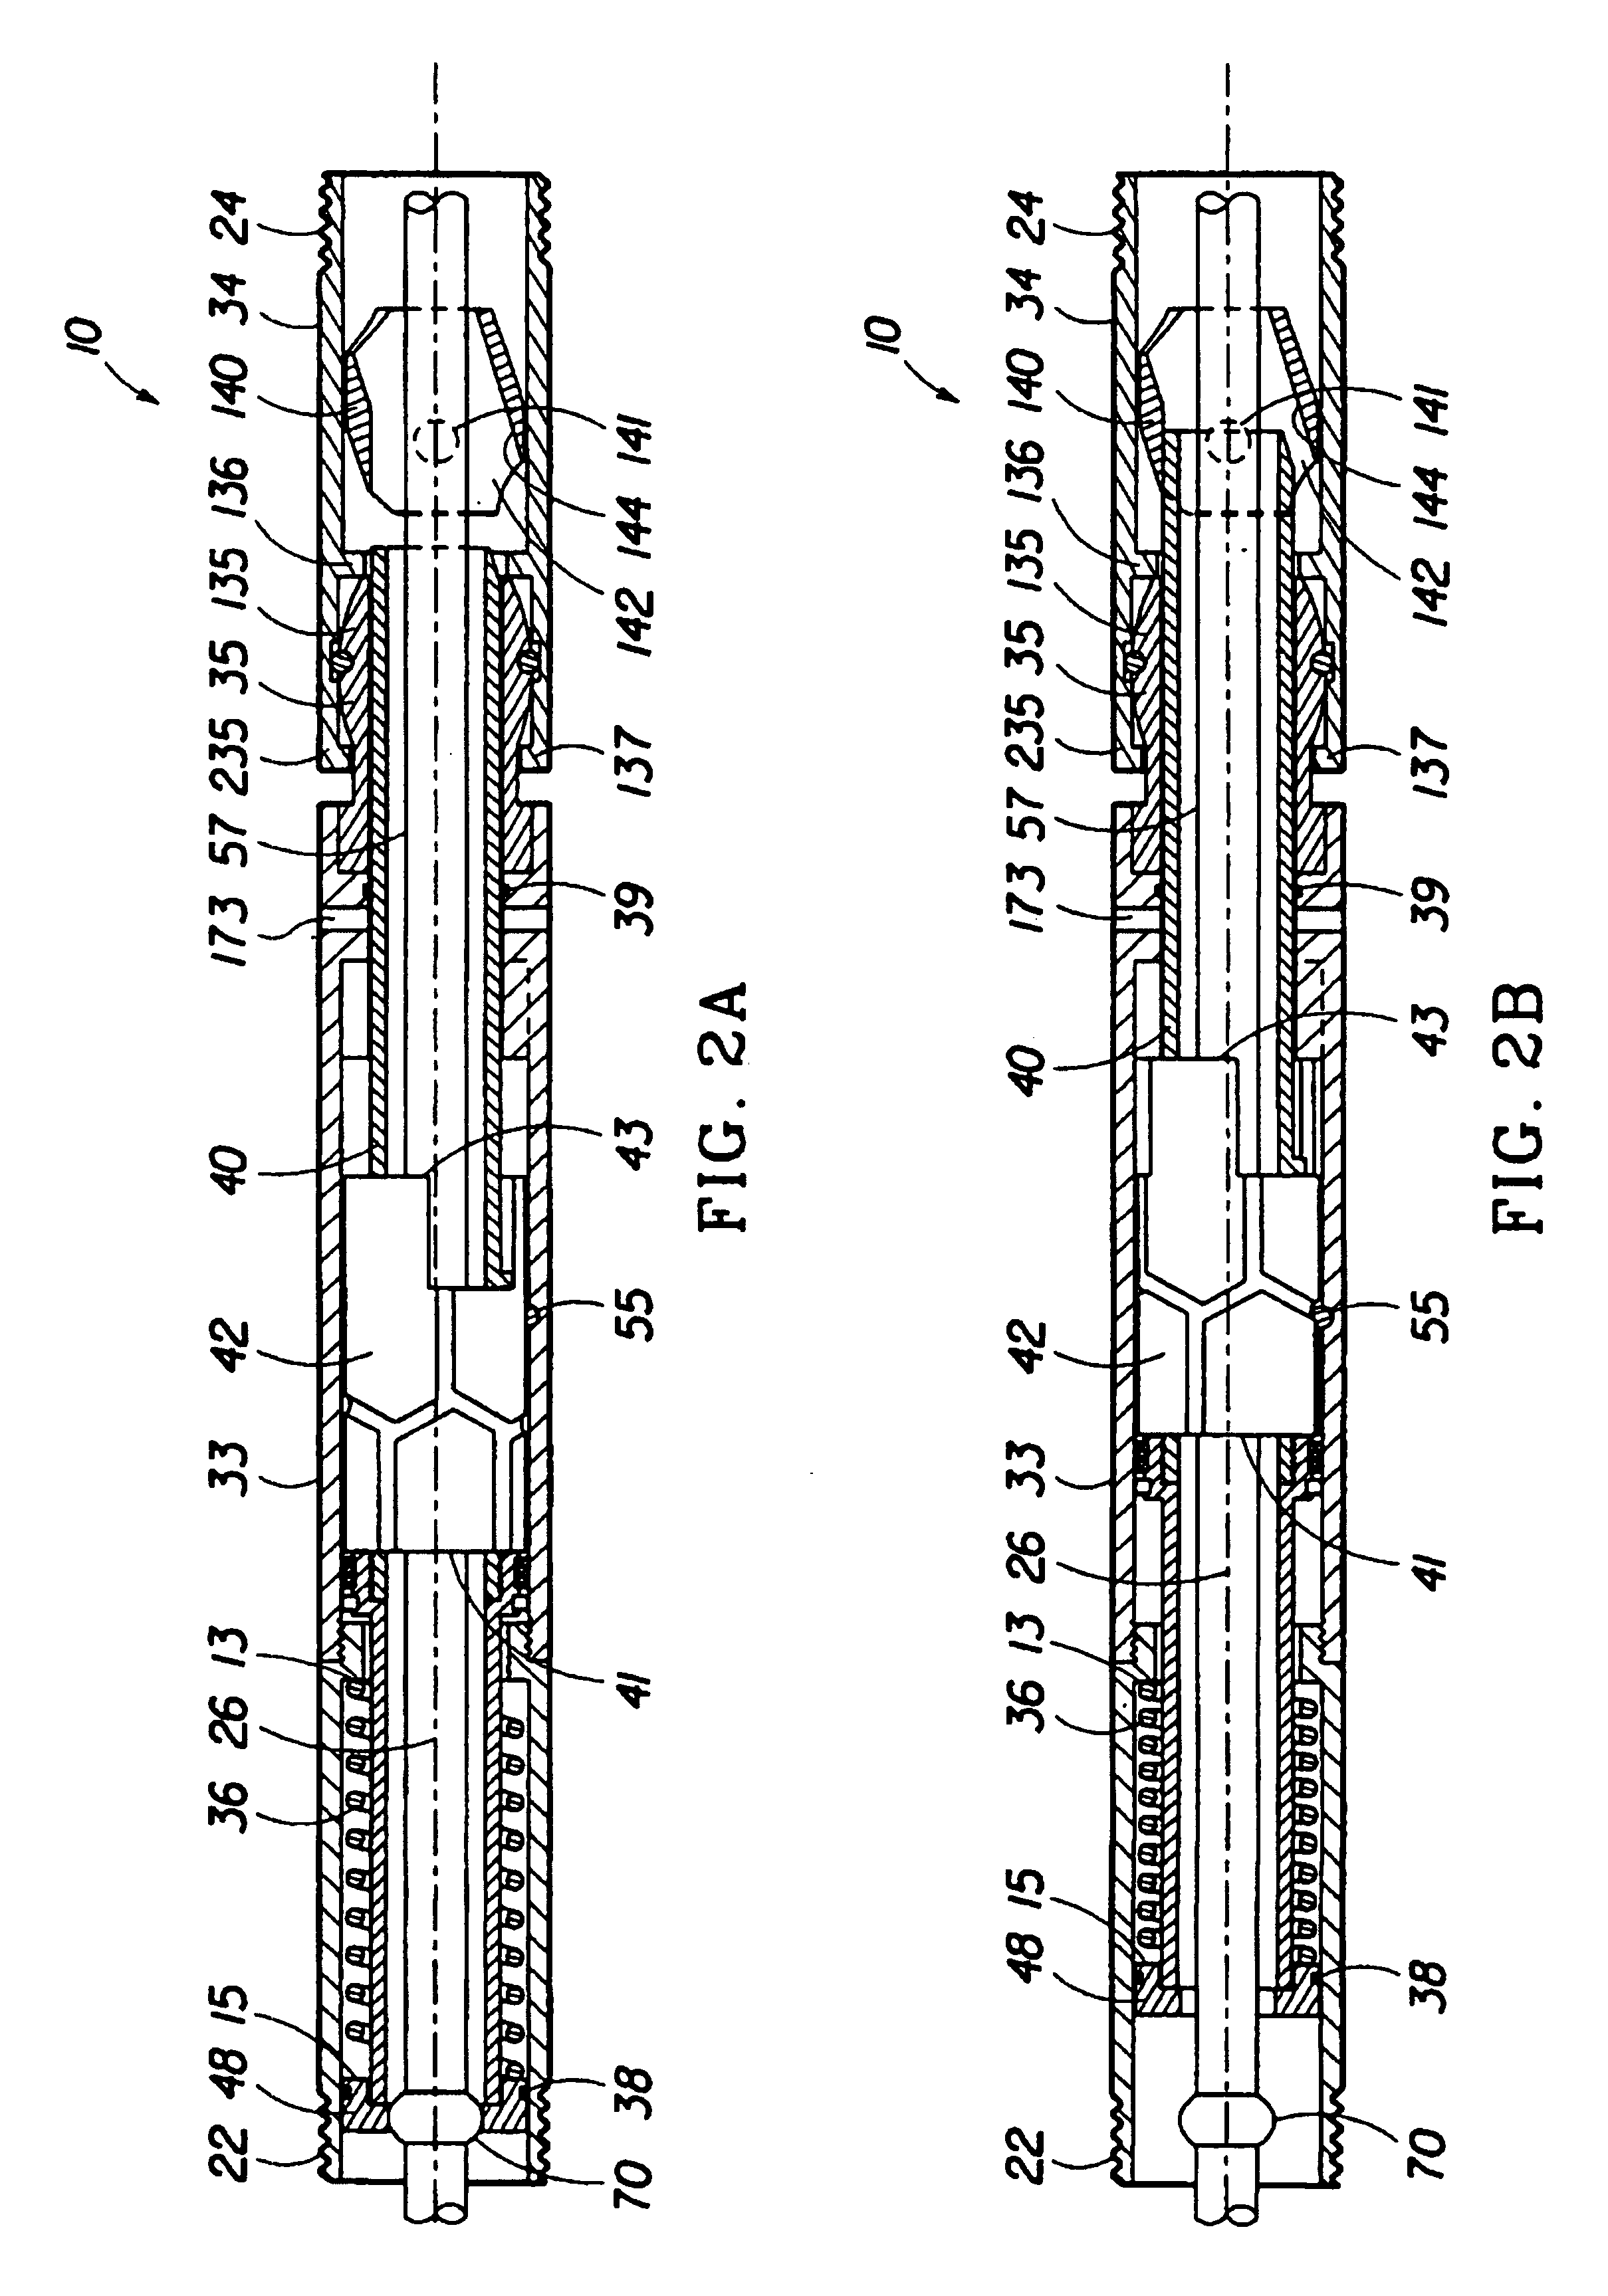 Downhole adjustable bent housing for directional drilling